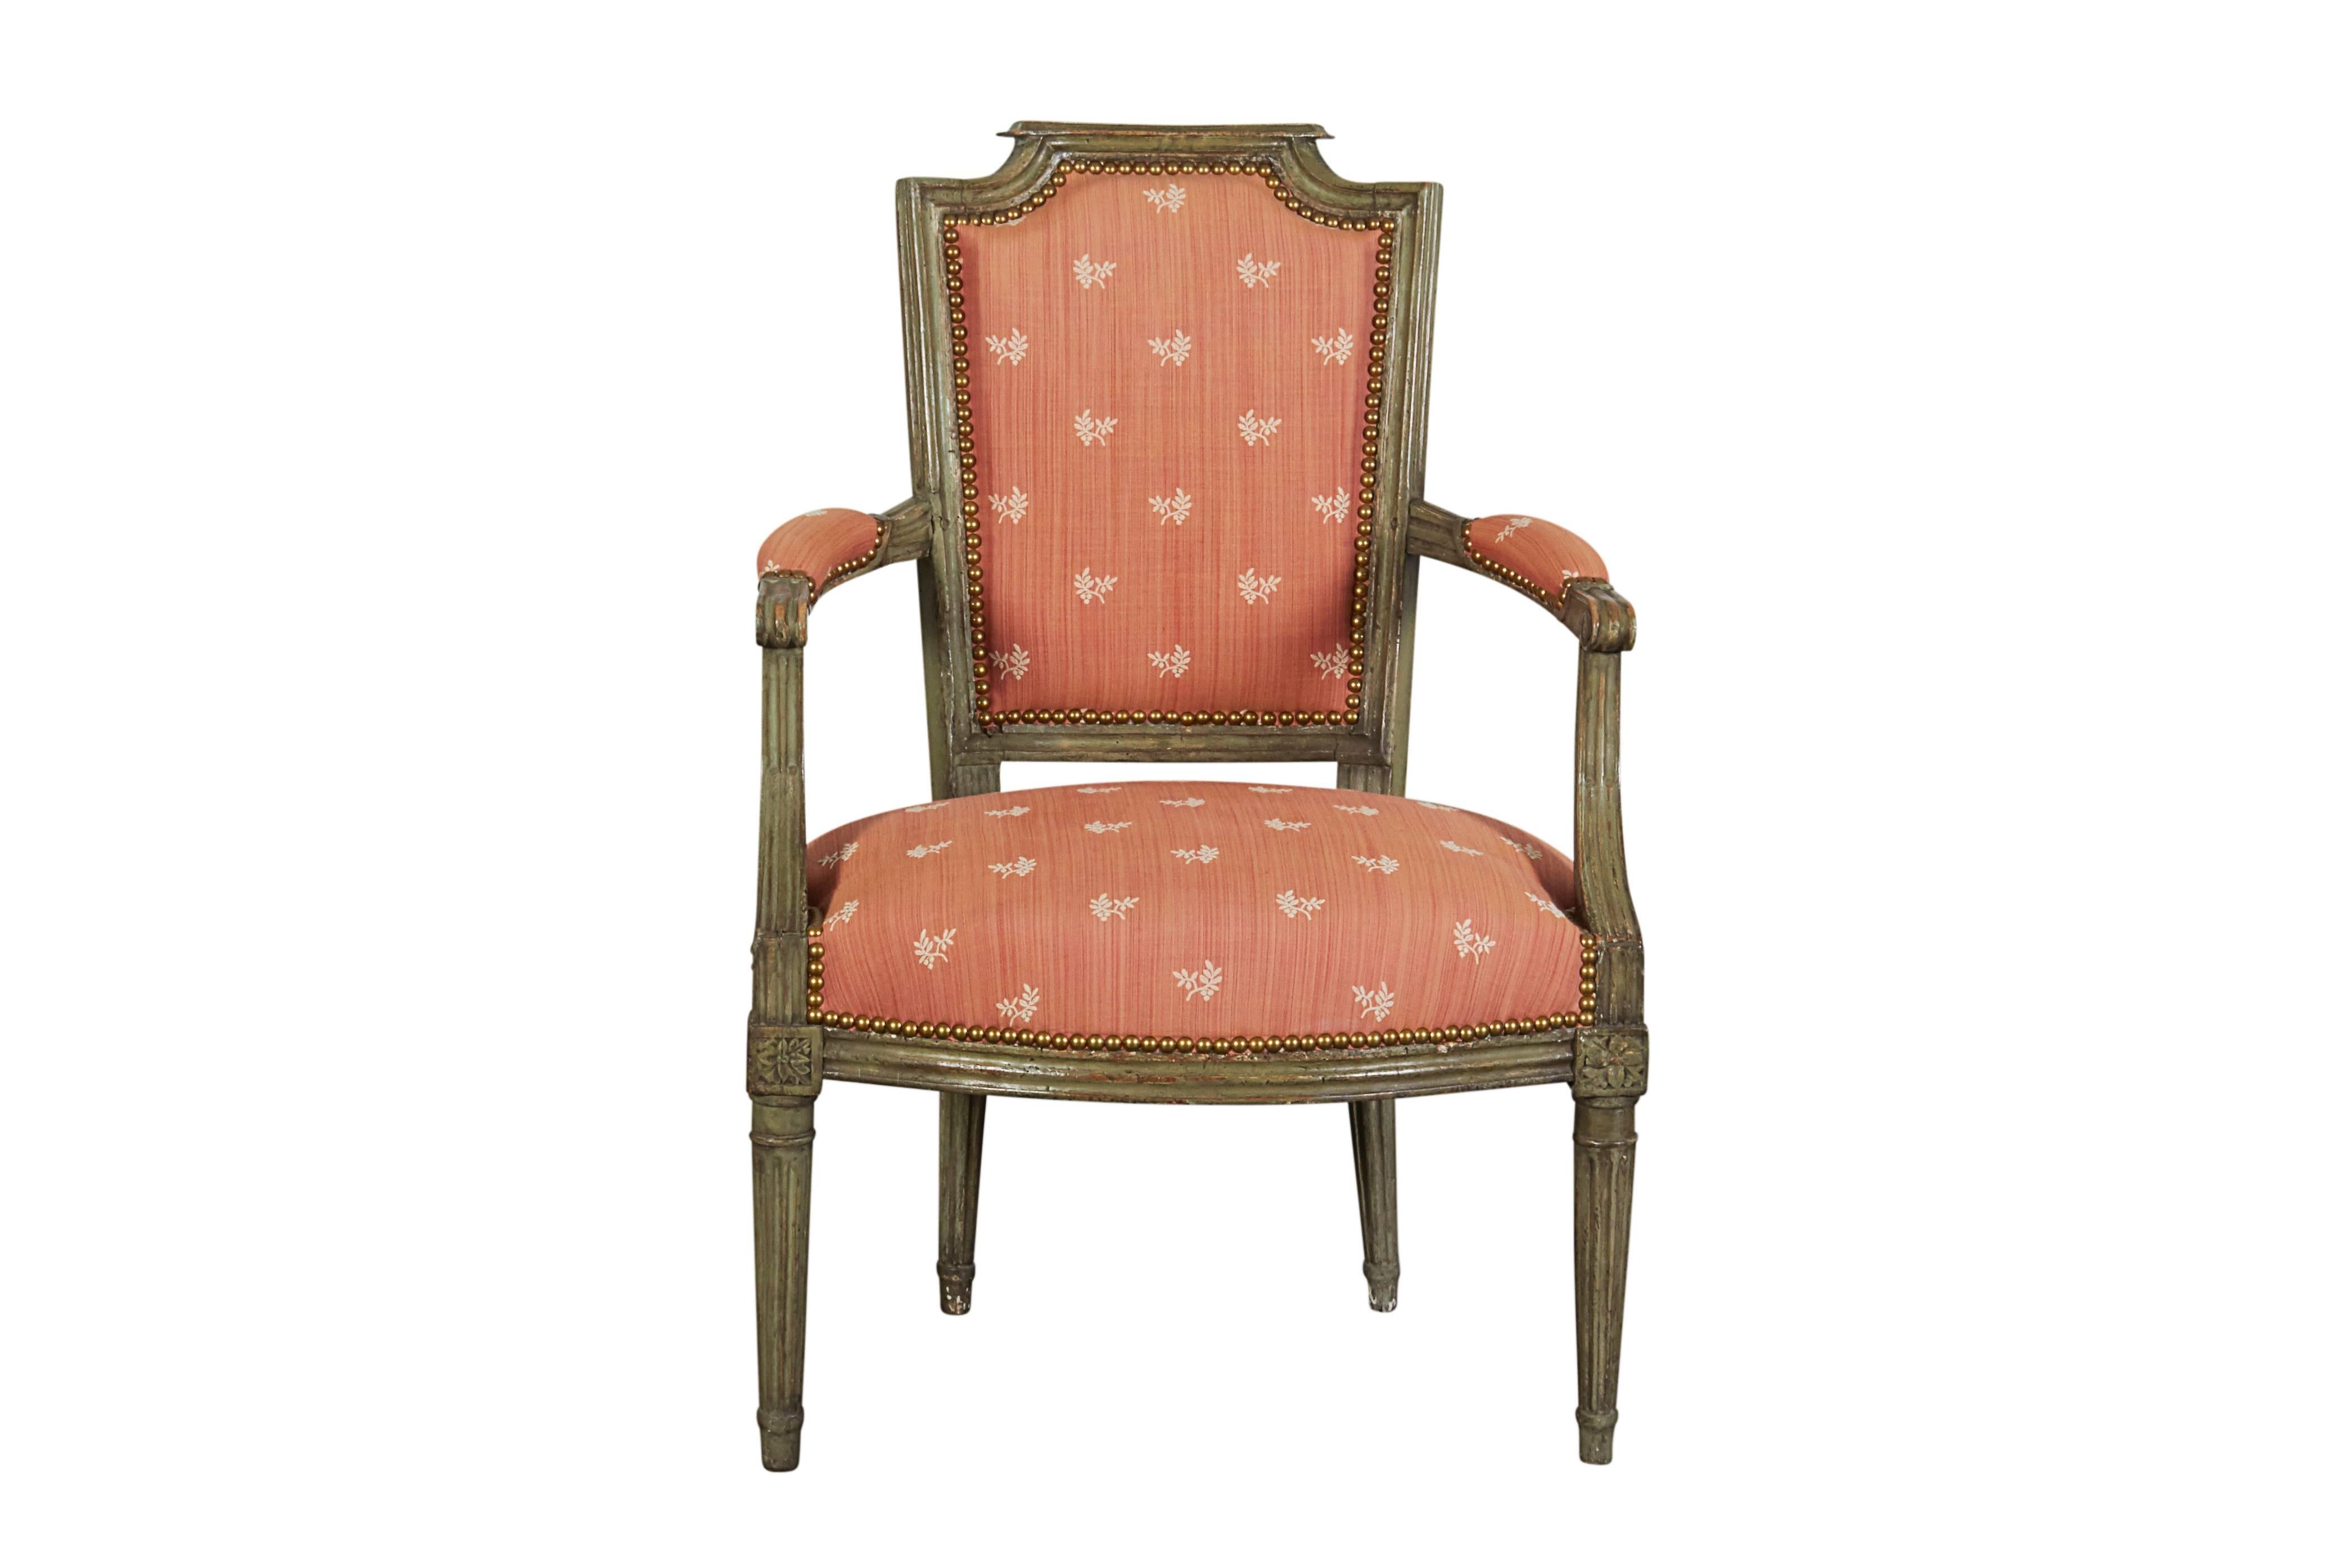 With upholstered back and seat and padded armrests raised on stop-fluted tapering legs headed by floral rosettes. Nicely scaled to use as a desk chair.